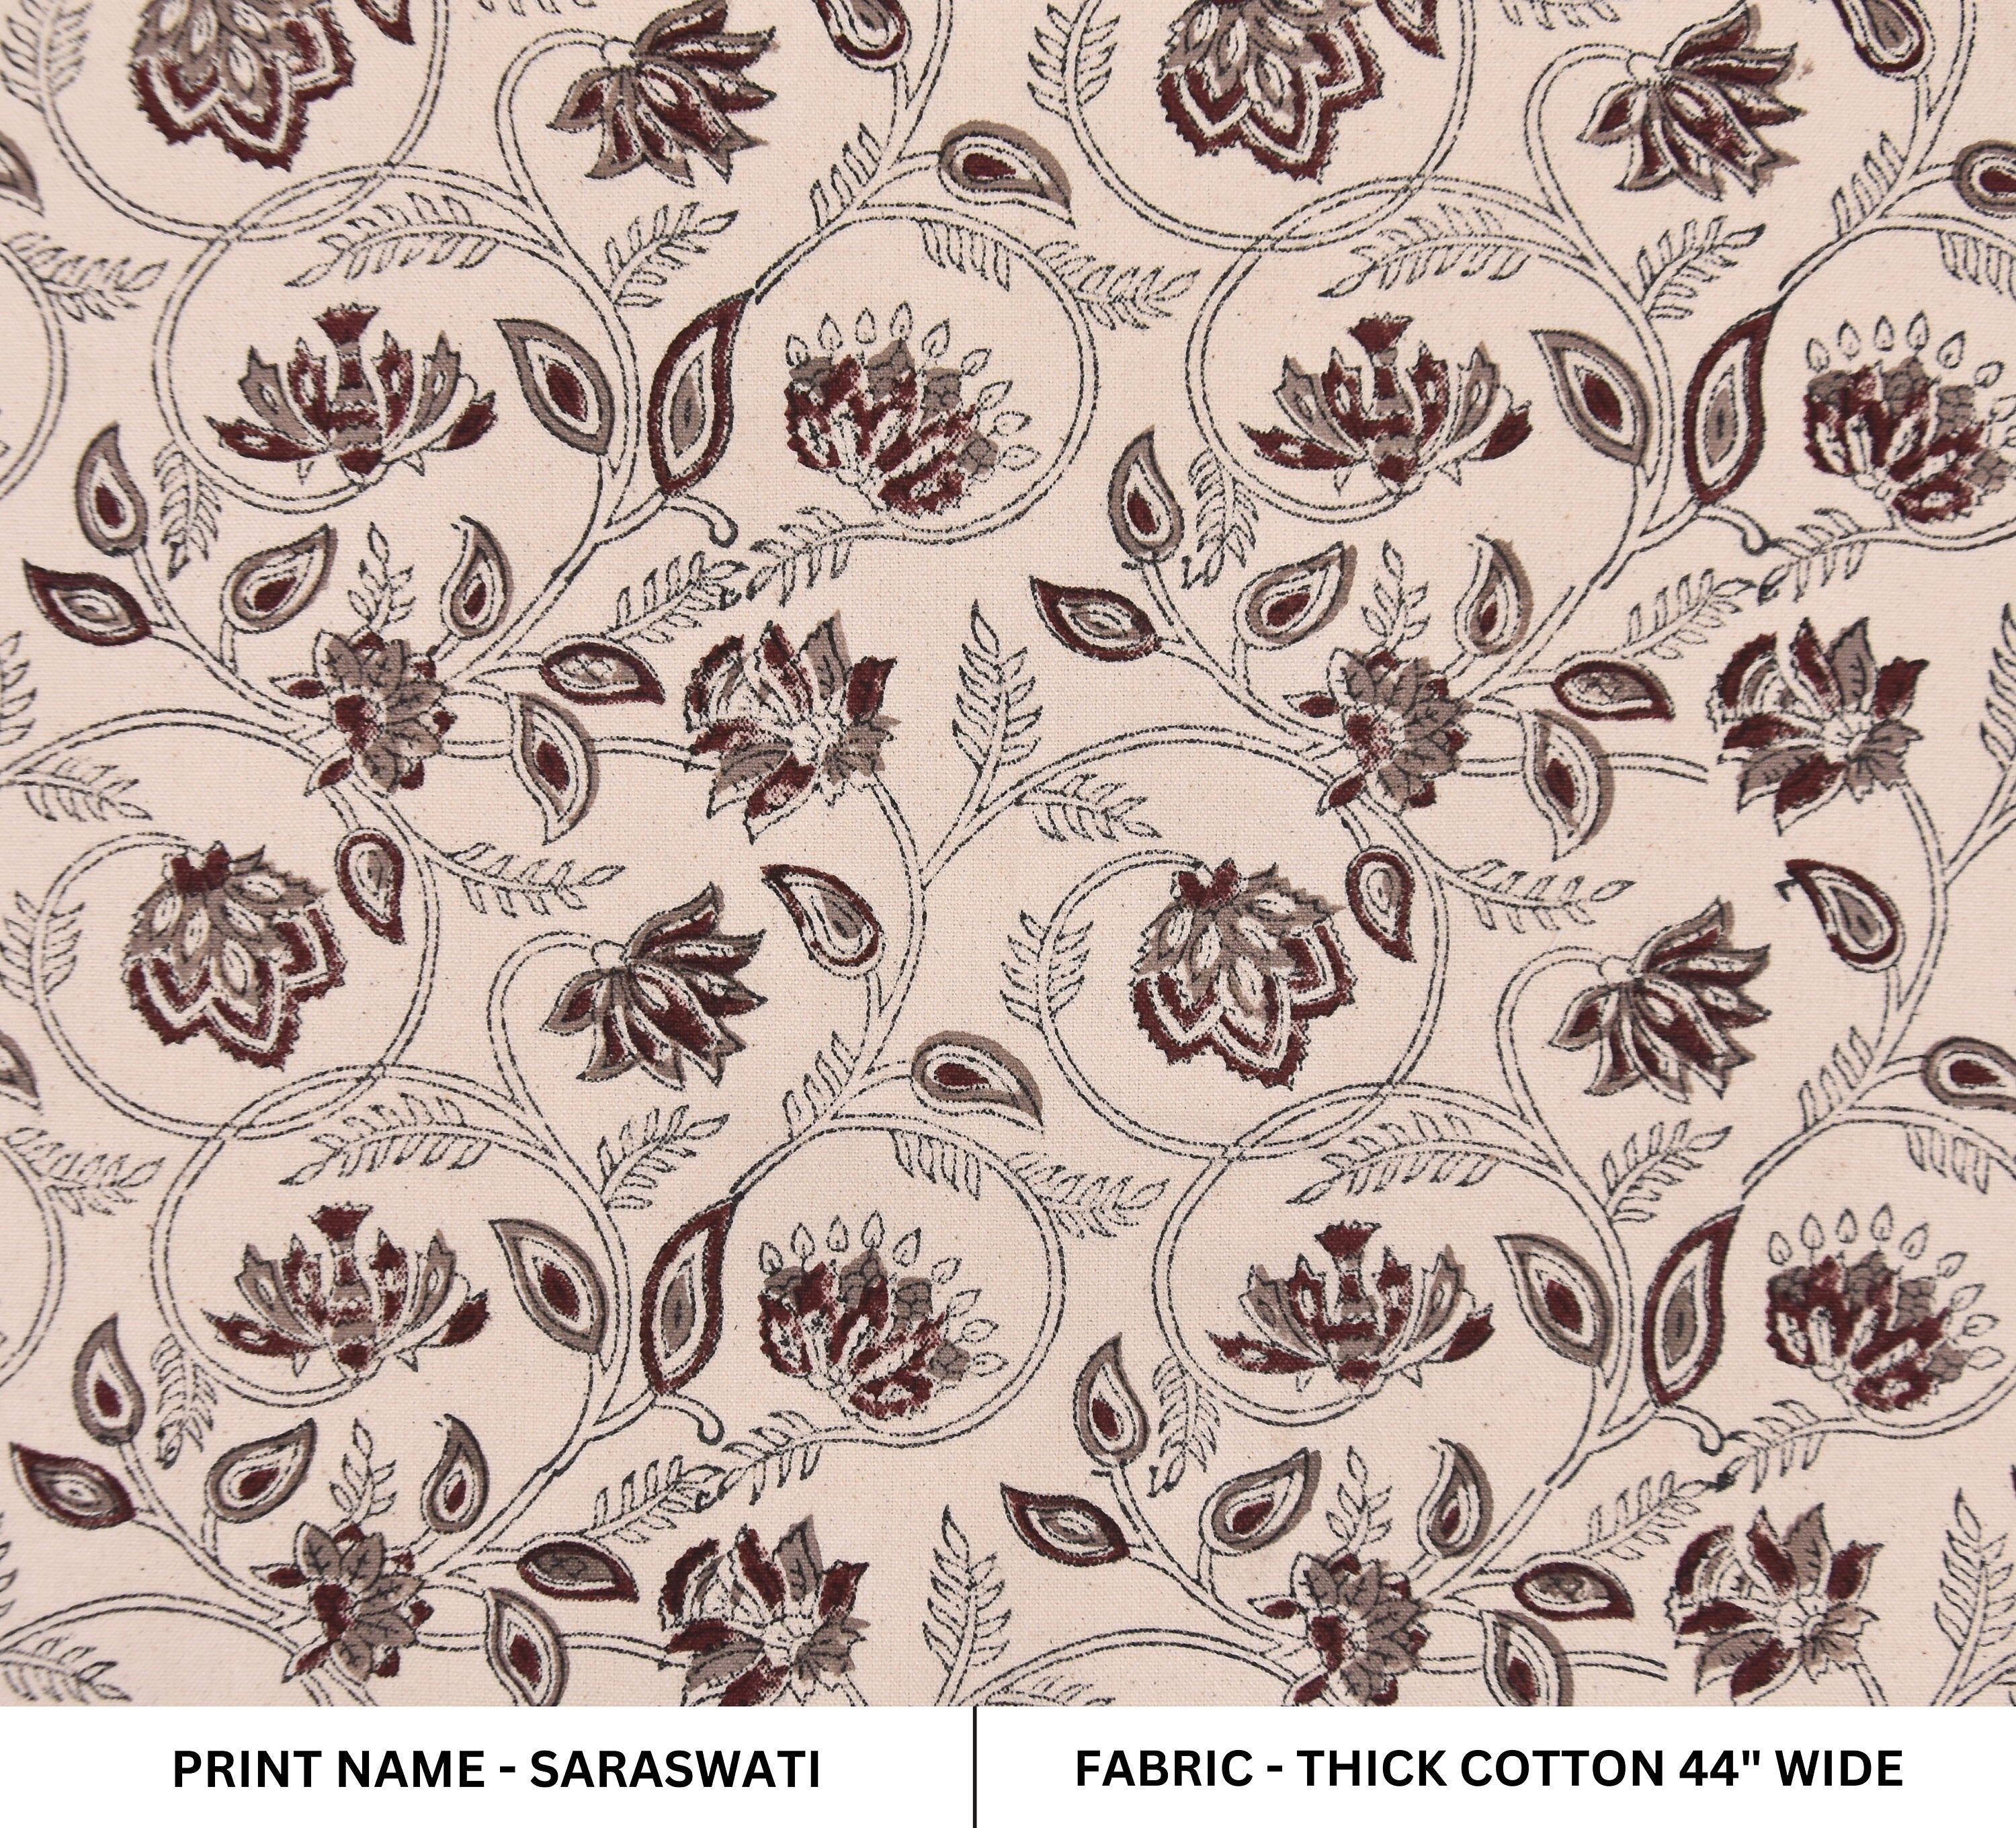 Thick cotton 44" wide fabric, Indian cotton fabric, cushion covers and window shades, farmhouse decor, rustic curtains - SARASWATI